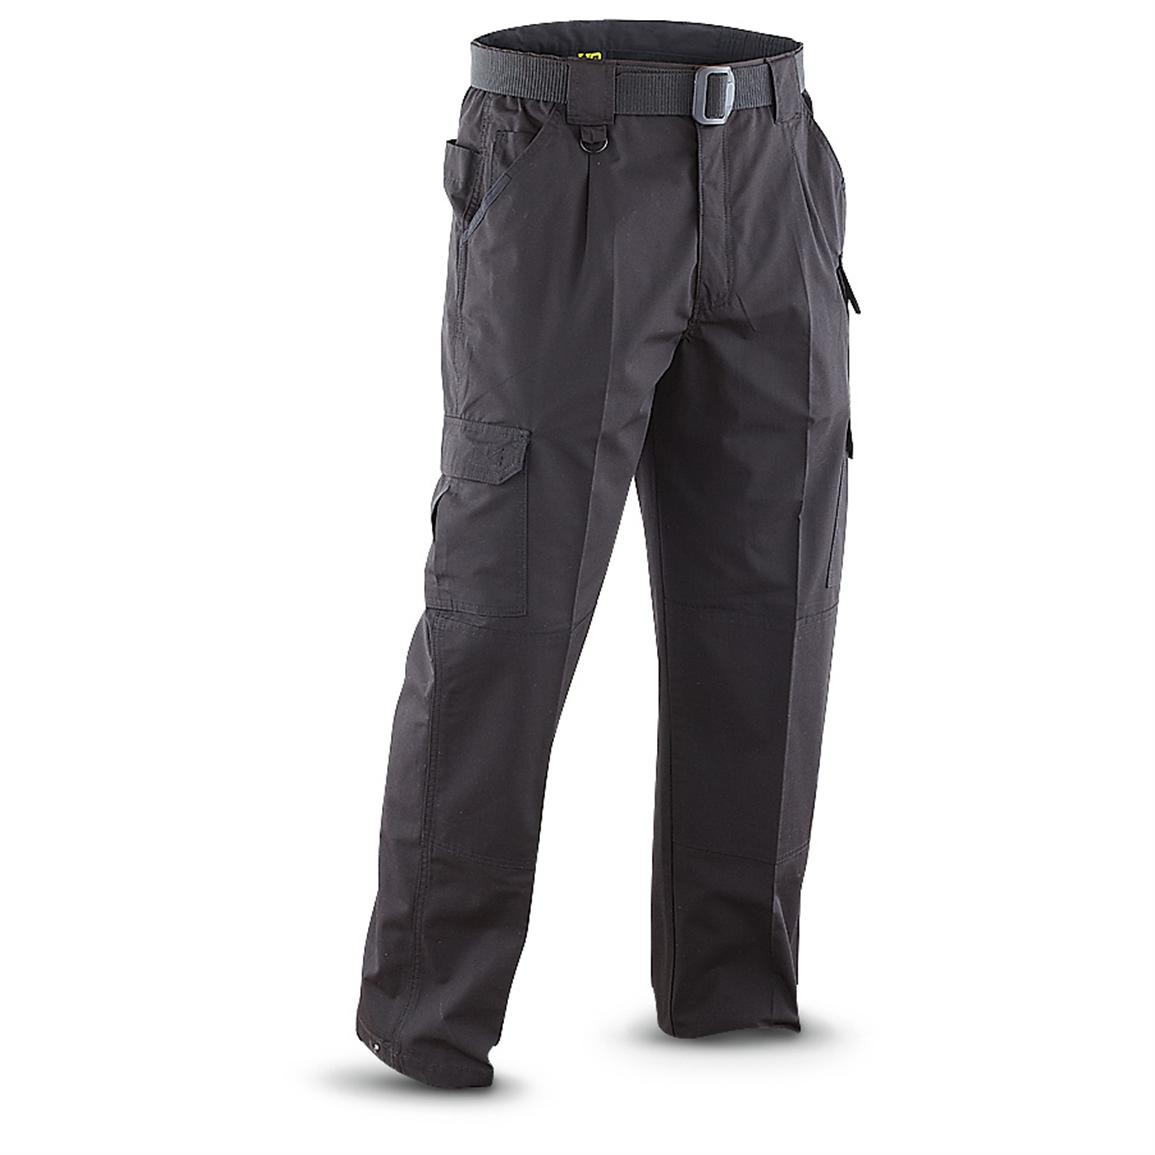 HQ ISSUE® Lightweight Tactical Pants - 235522, Tactical Clothing at ...